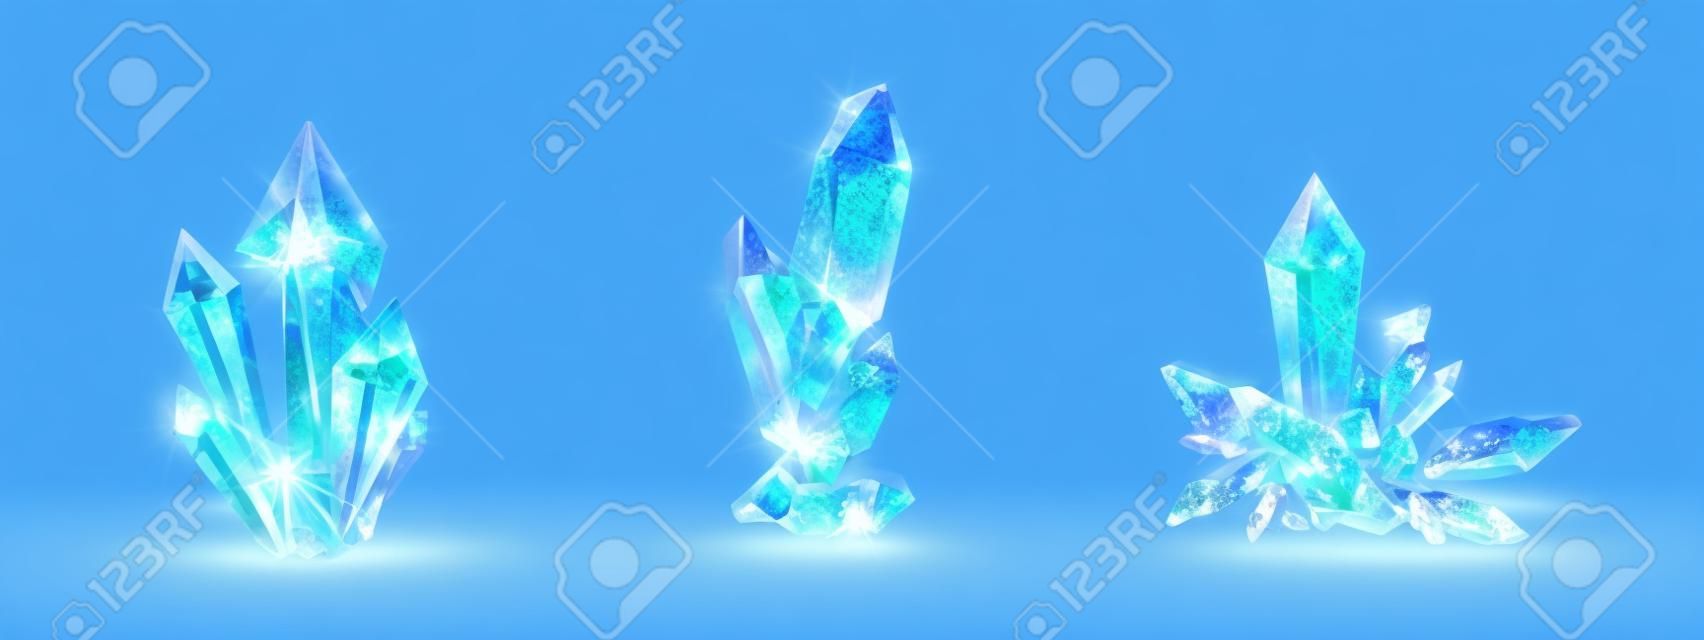 Crystal clusters with blue glowing light aura, quartz or crystalline mineral. Unfaceted rough glowing rocks stalagmites, isolated jewelry precious or semiprecious gem stones, Realistic 3d vector set